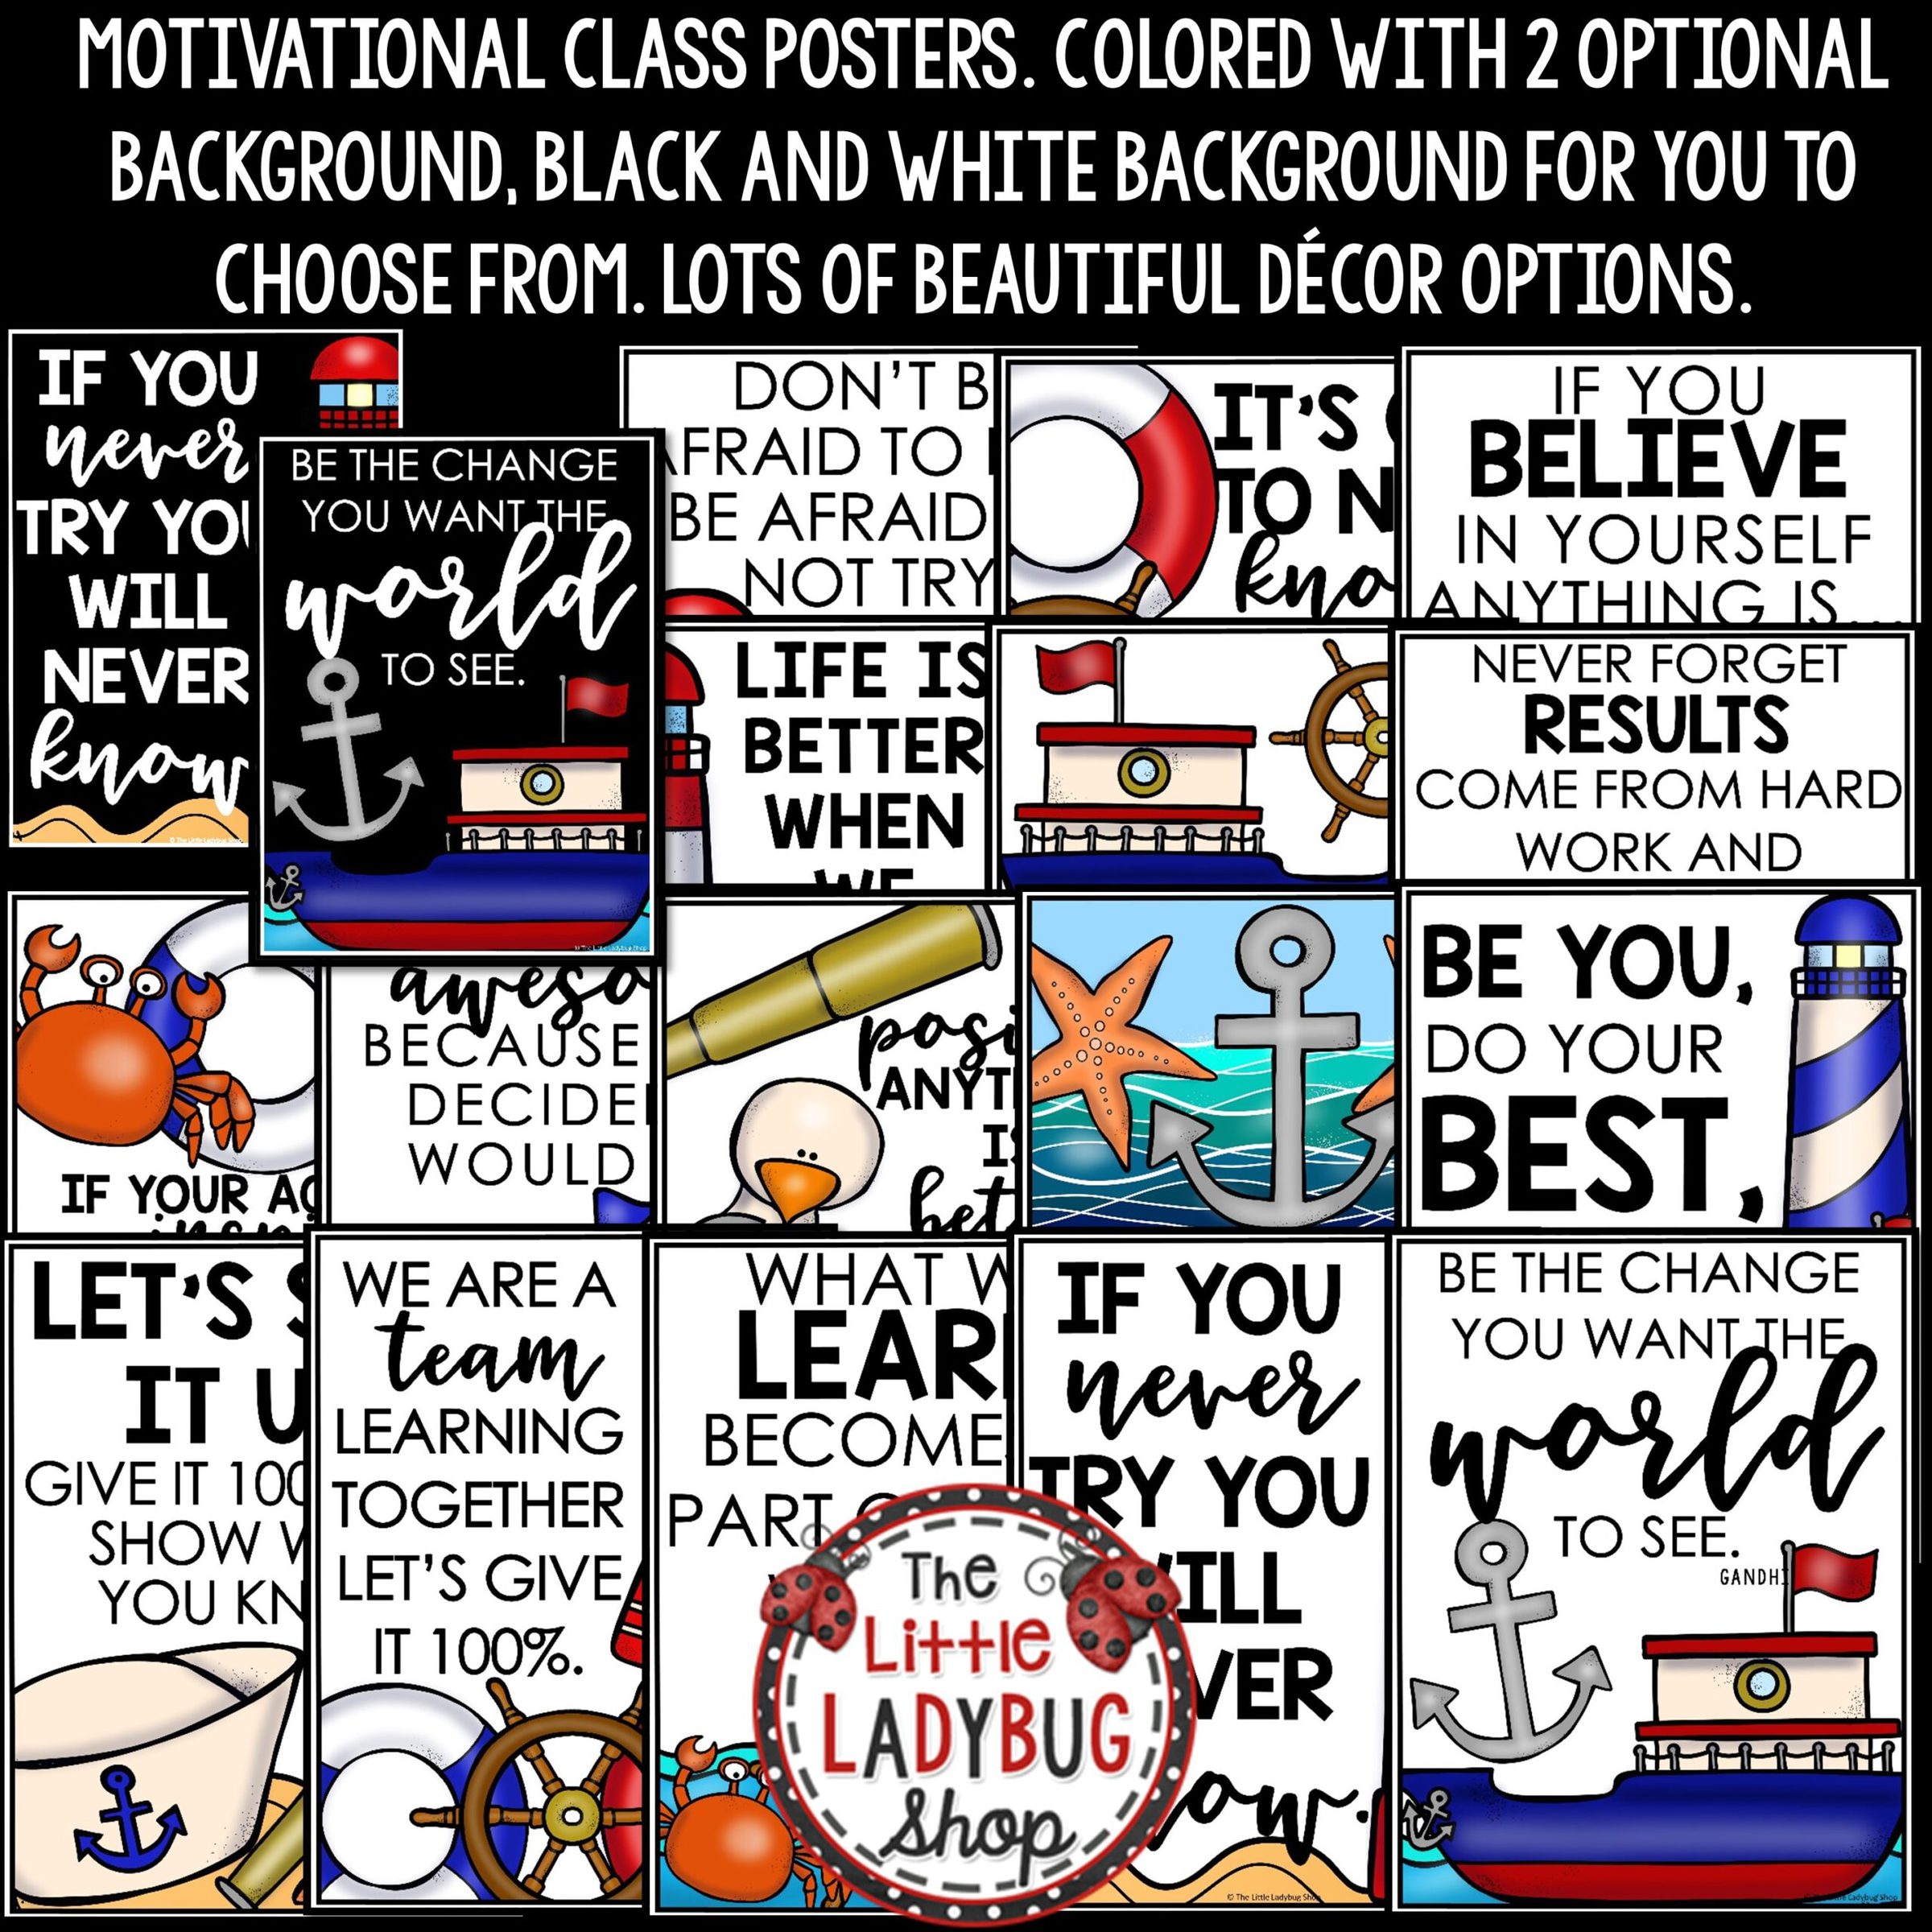 Teacher Created Resources Nautical Positive Posters Pack 6885 